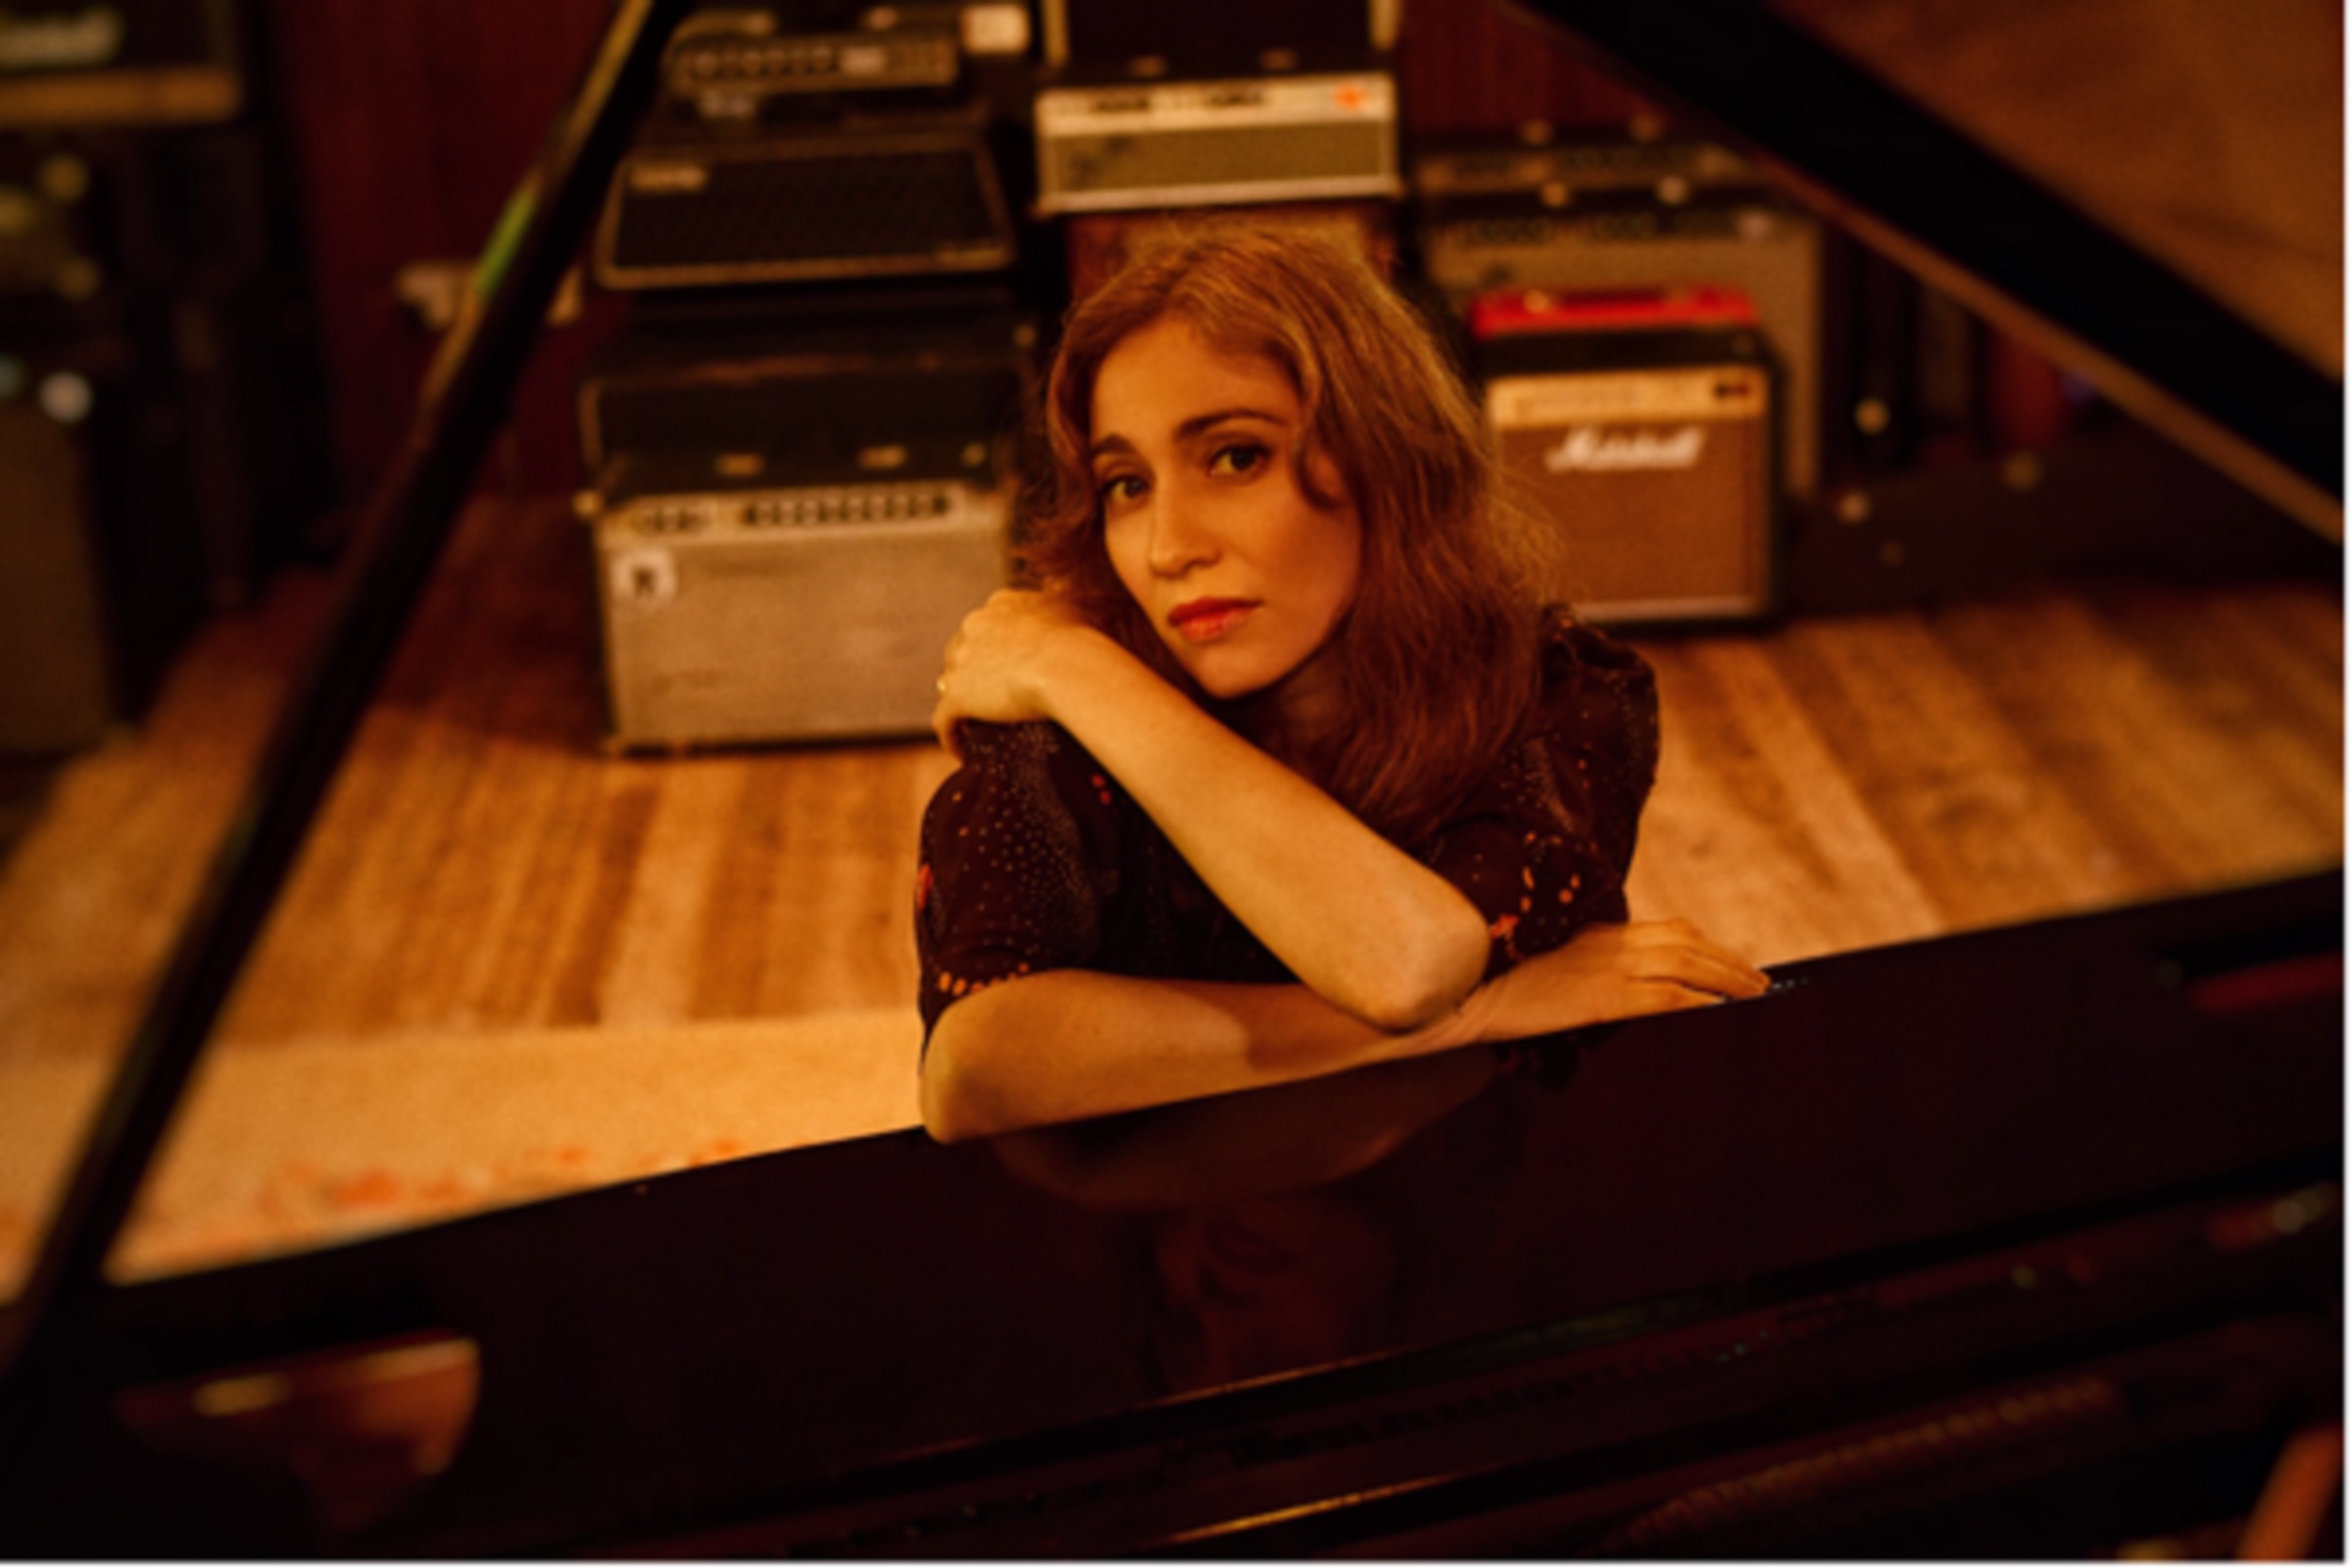 Regina Spektor unveils "Up The Mountain," from new LP 'Home, before and after' out June 24